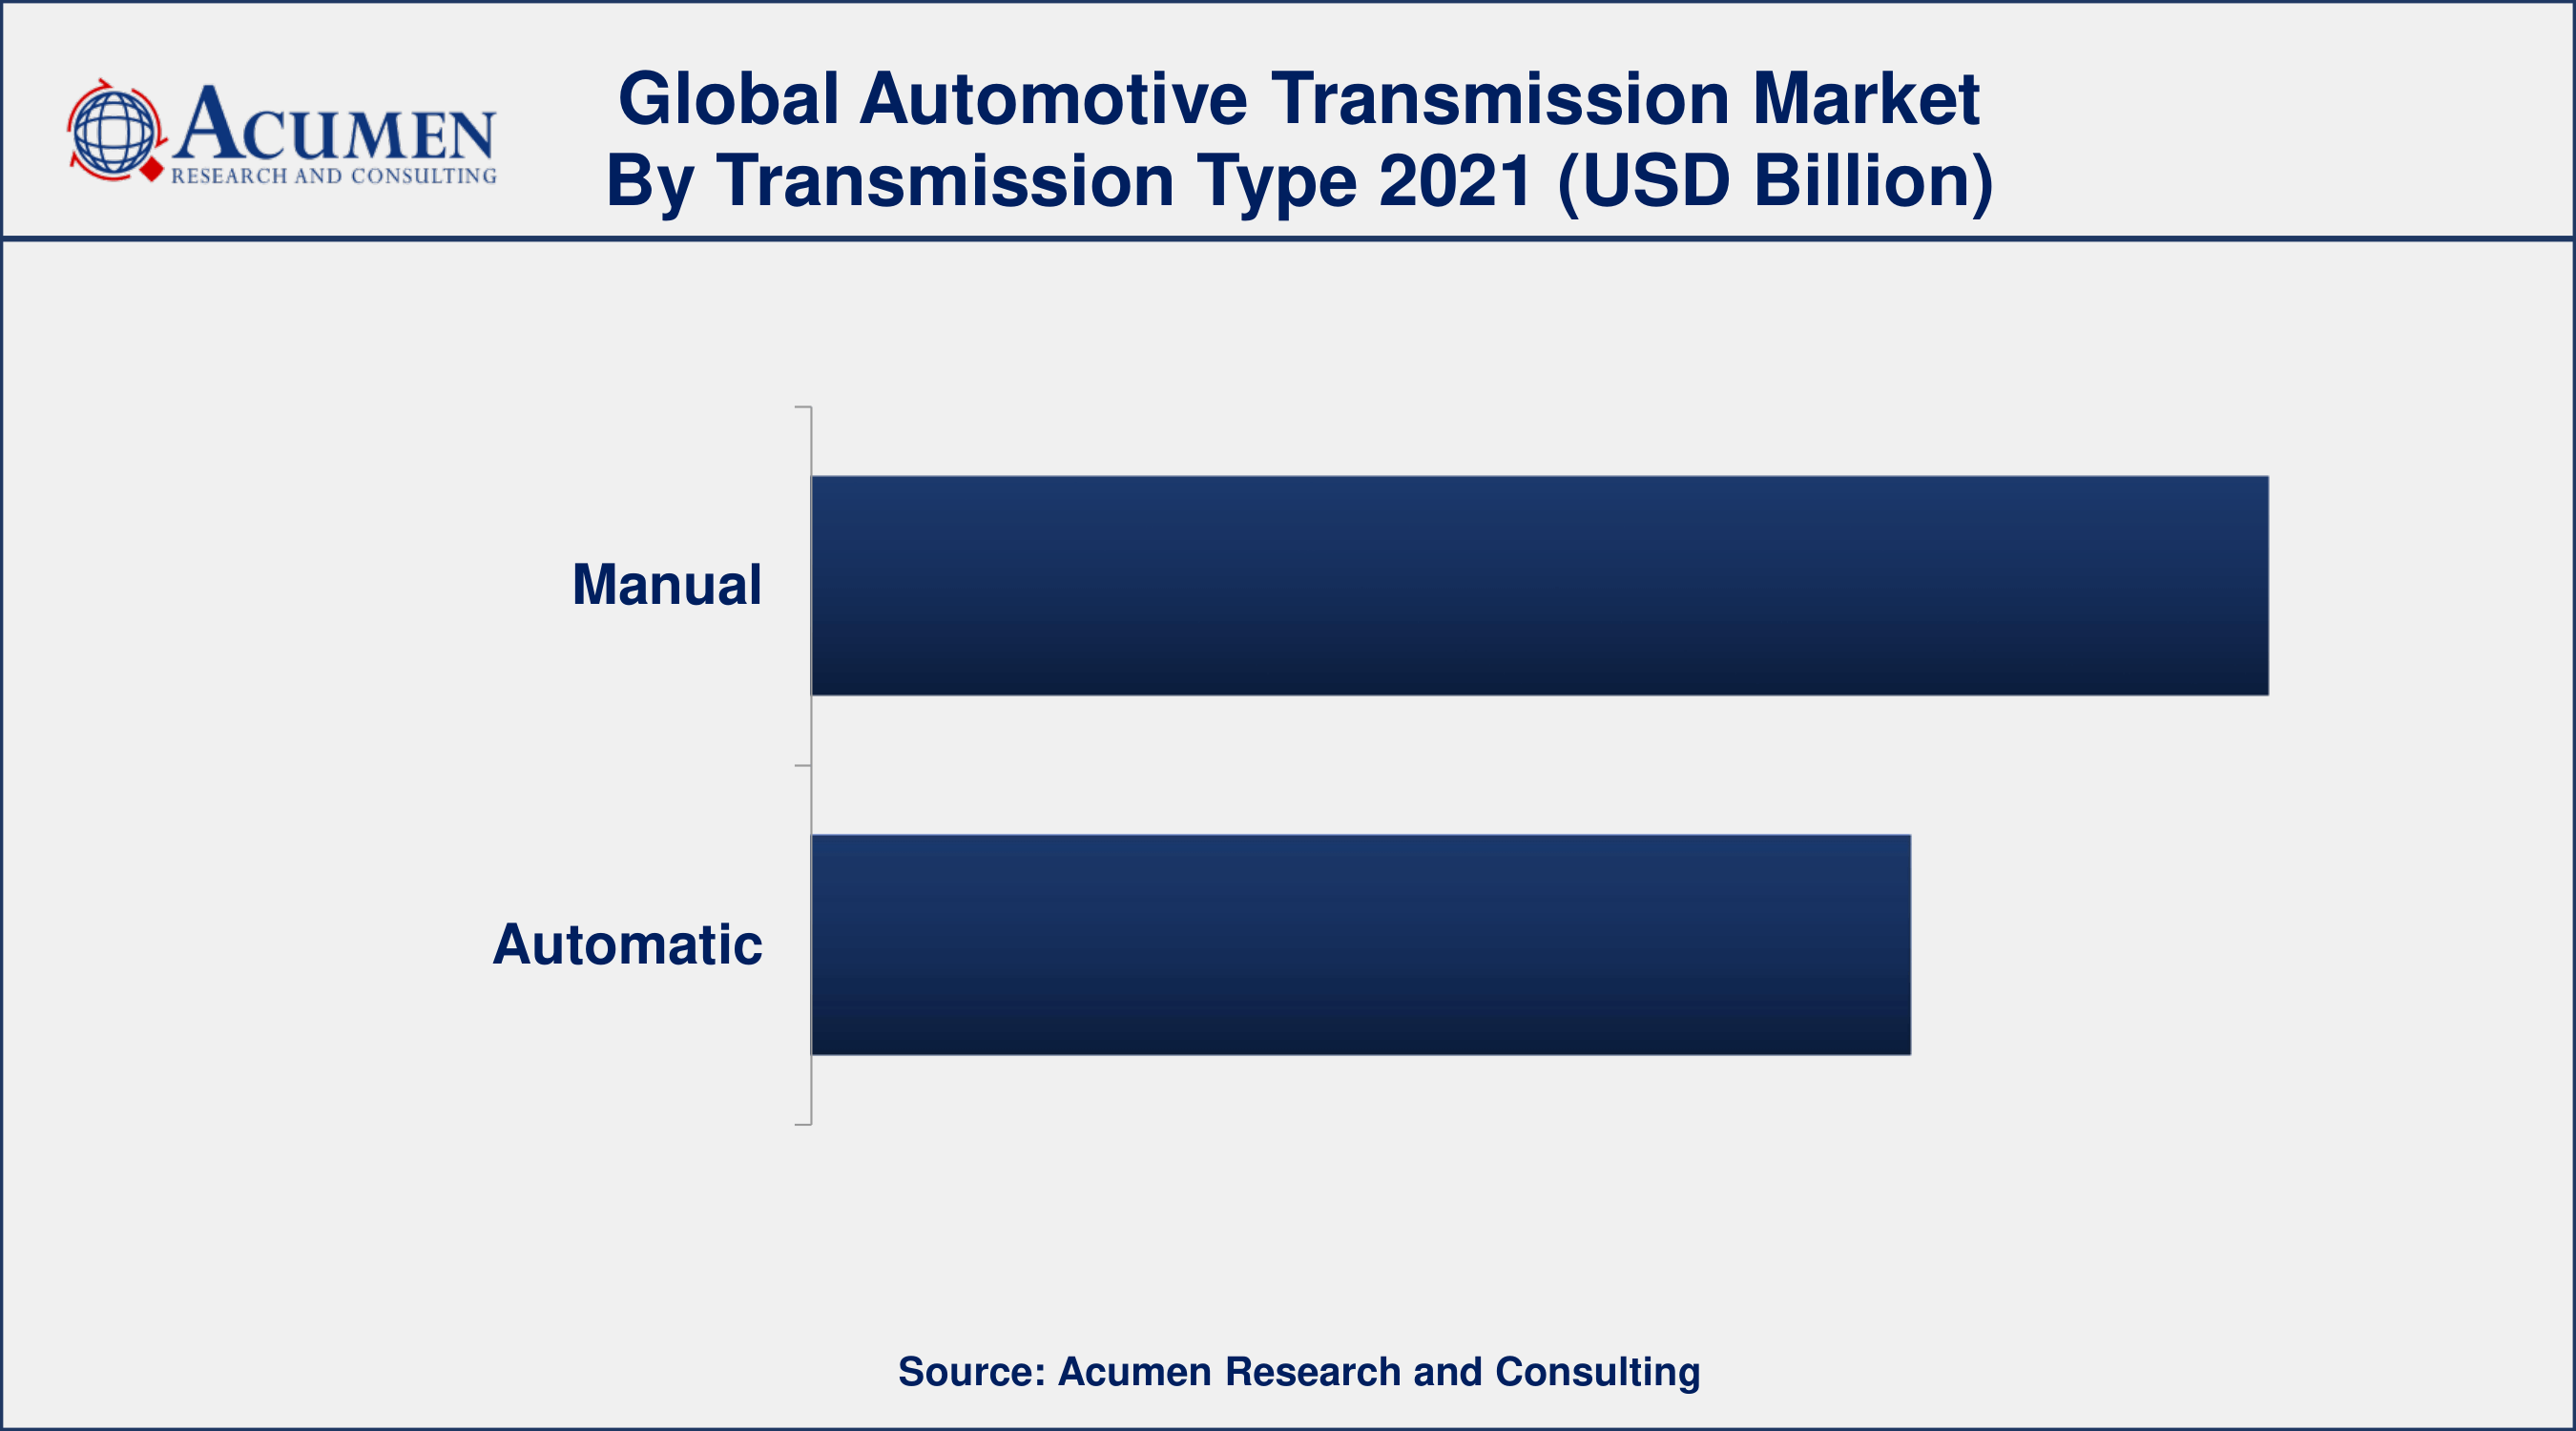 By transmission type, the manual segment has accounted market share of over 58% in 2021